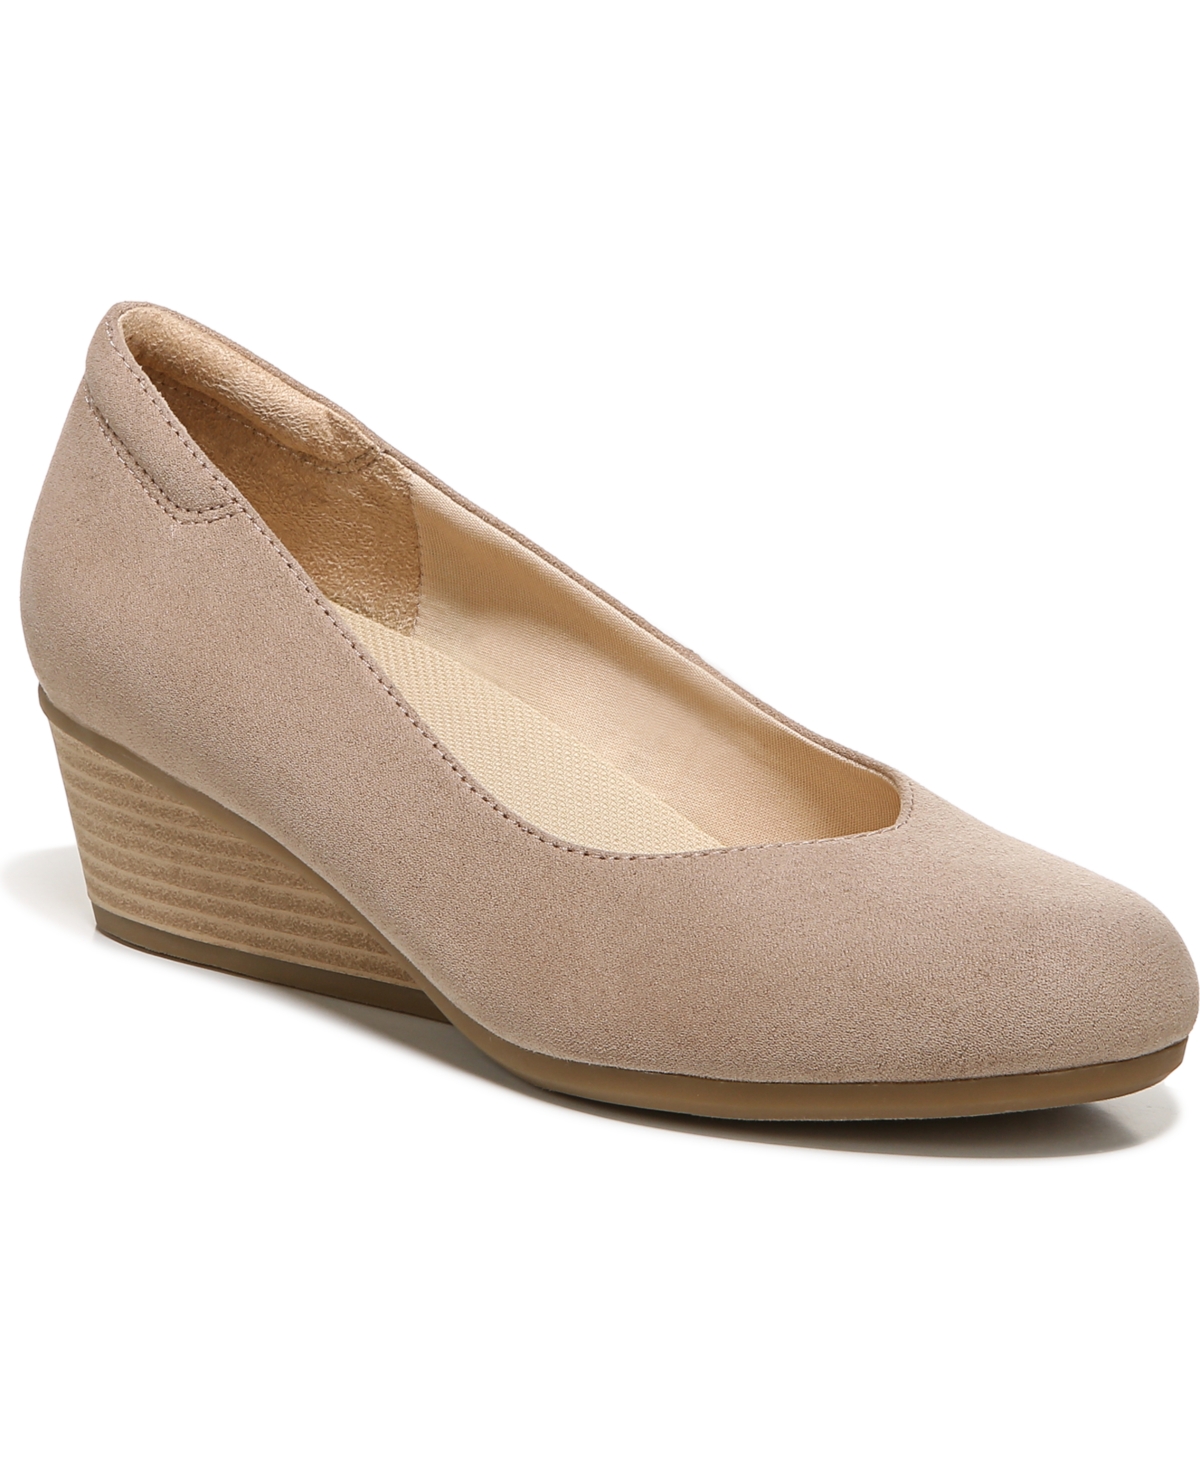 Dr. Scholl's Women's Be Ready Wedge Pumps In Taupe Microfiber